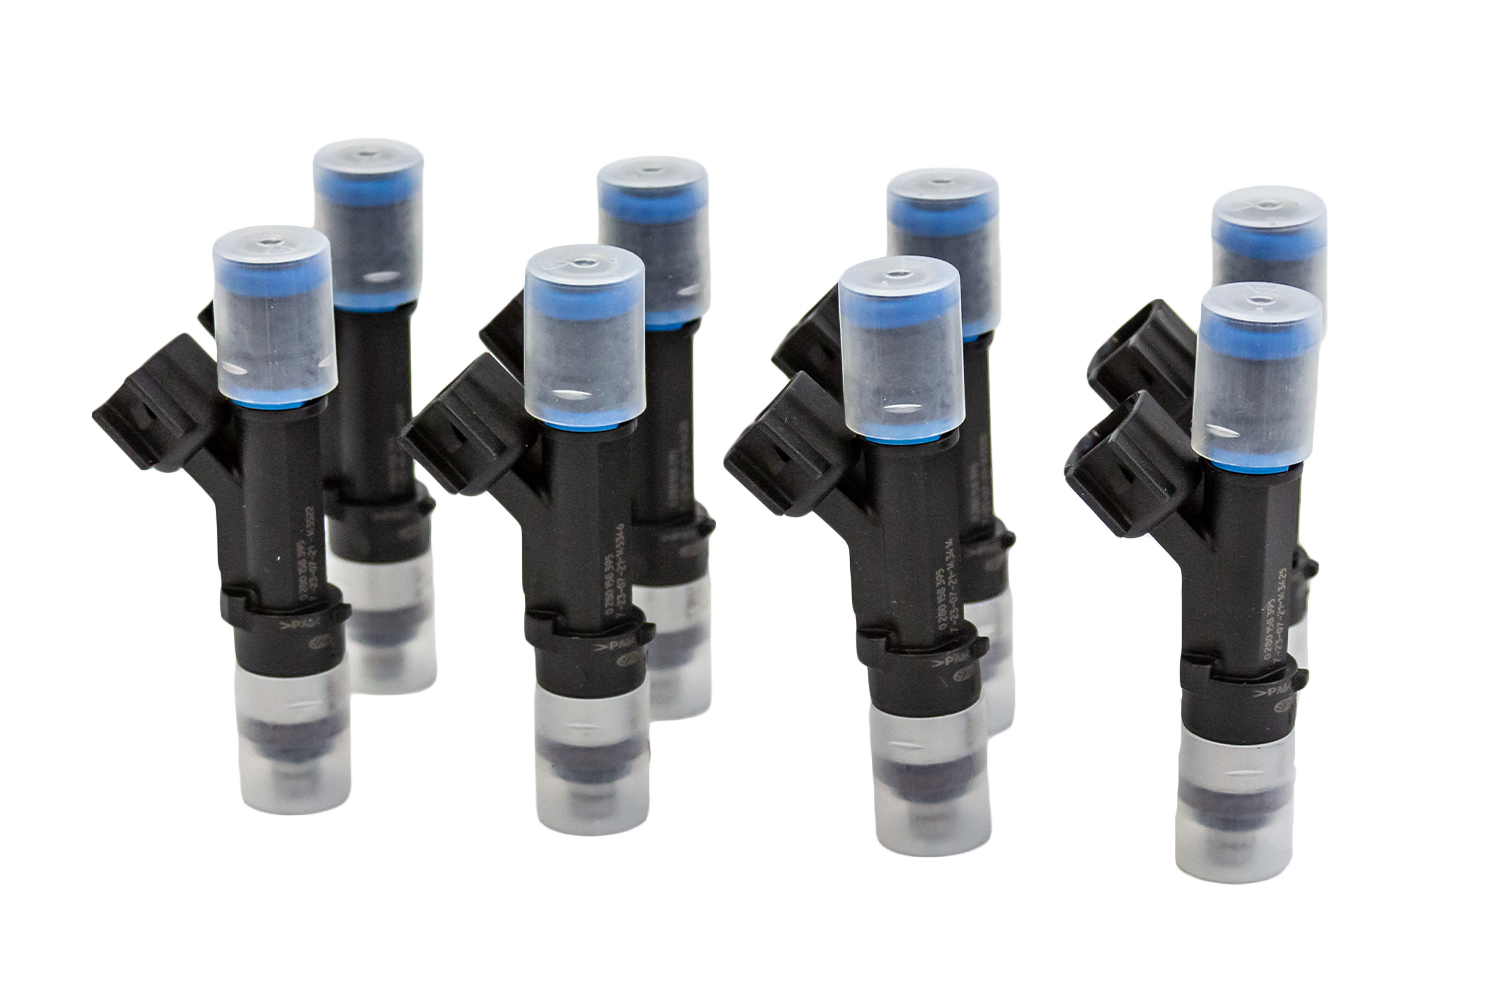 Ford Performance Mustang Fuel Injectors